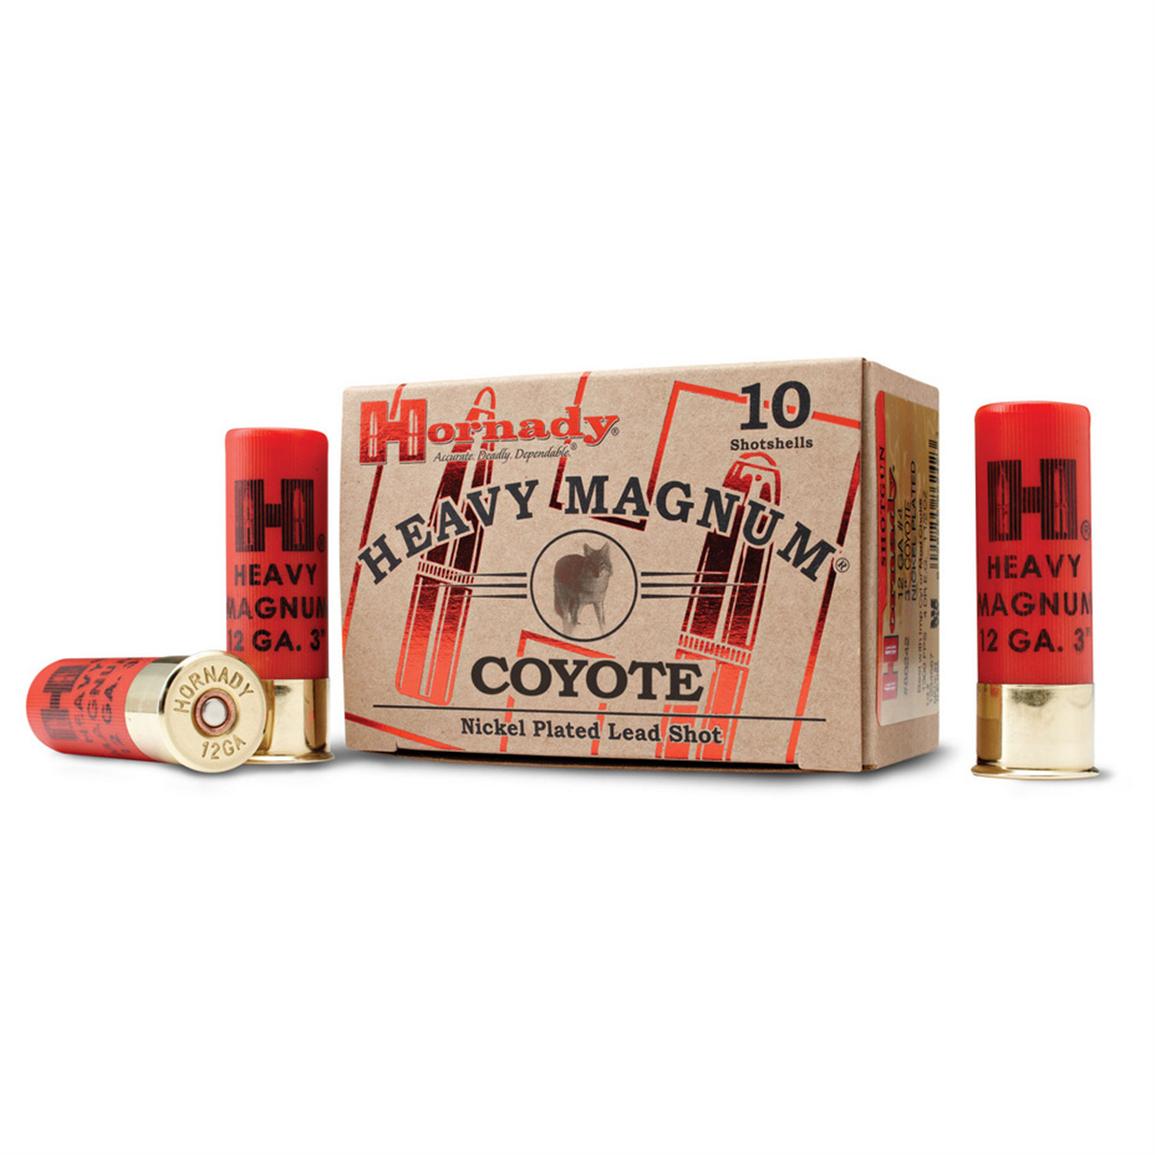 10 rounds of Hornady® Heavy Magnum® Coyote 3" Nickel-plated BB Lead Shot